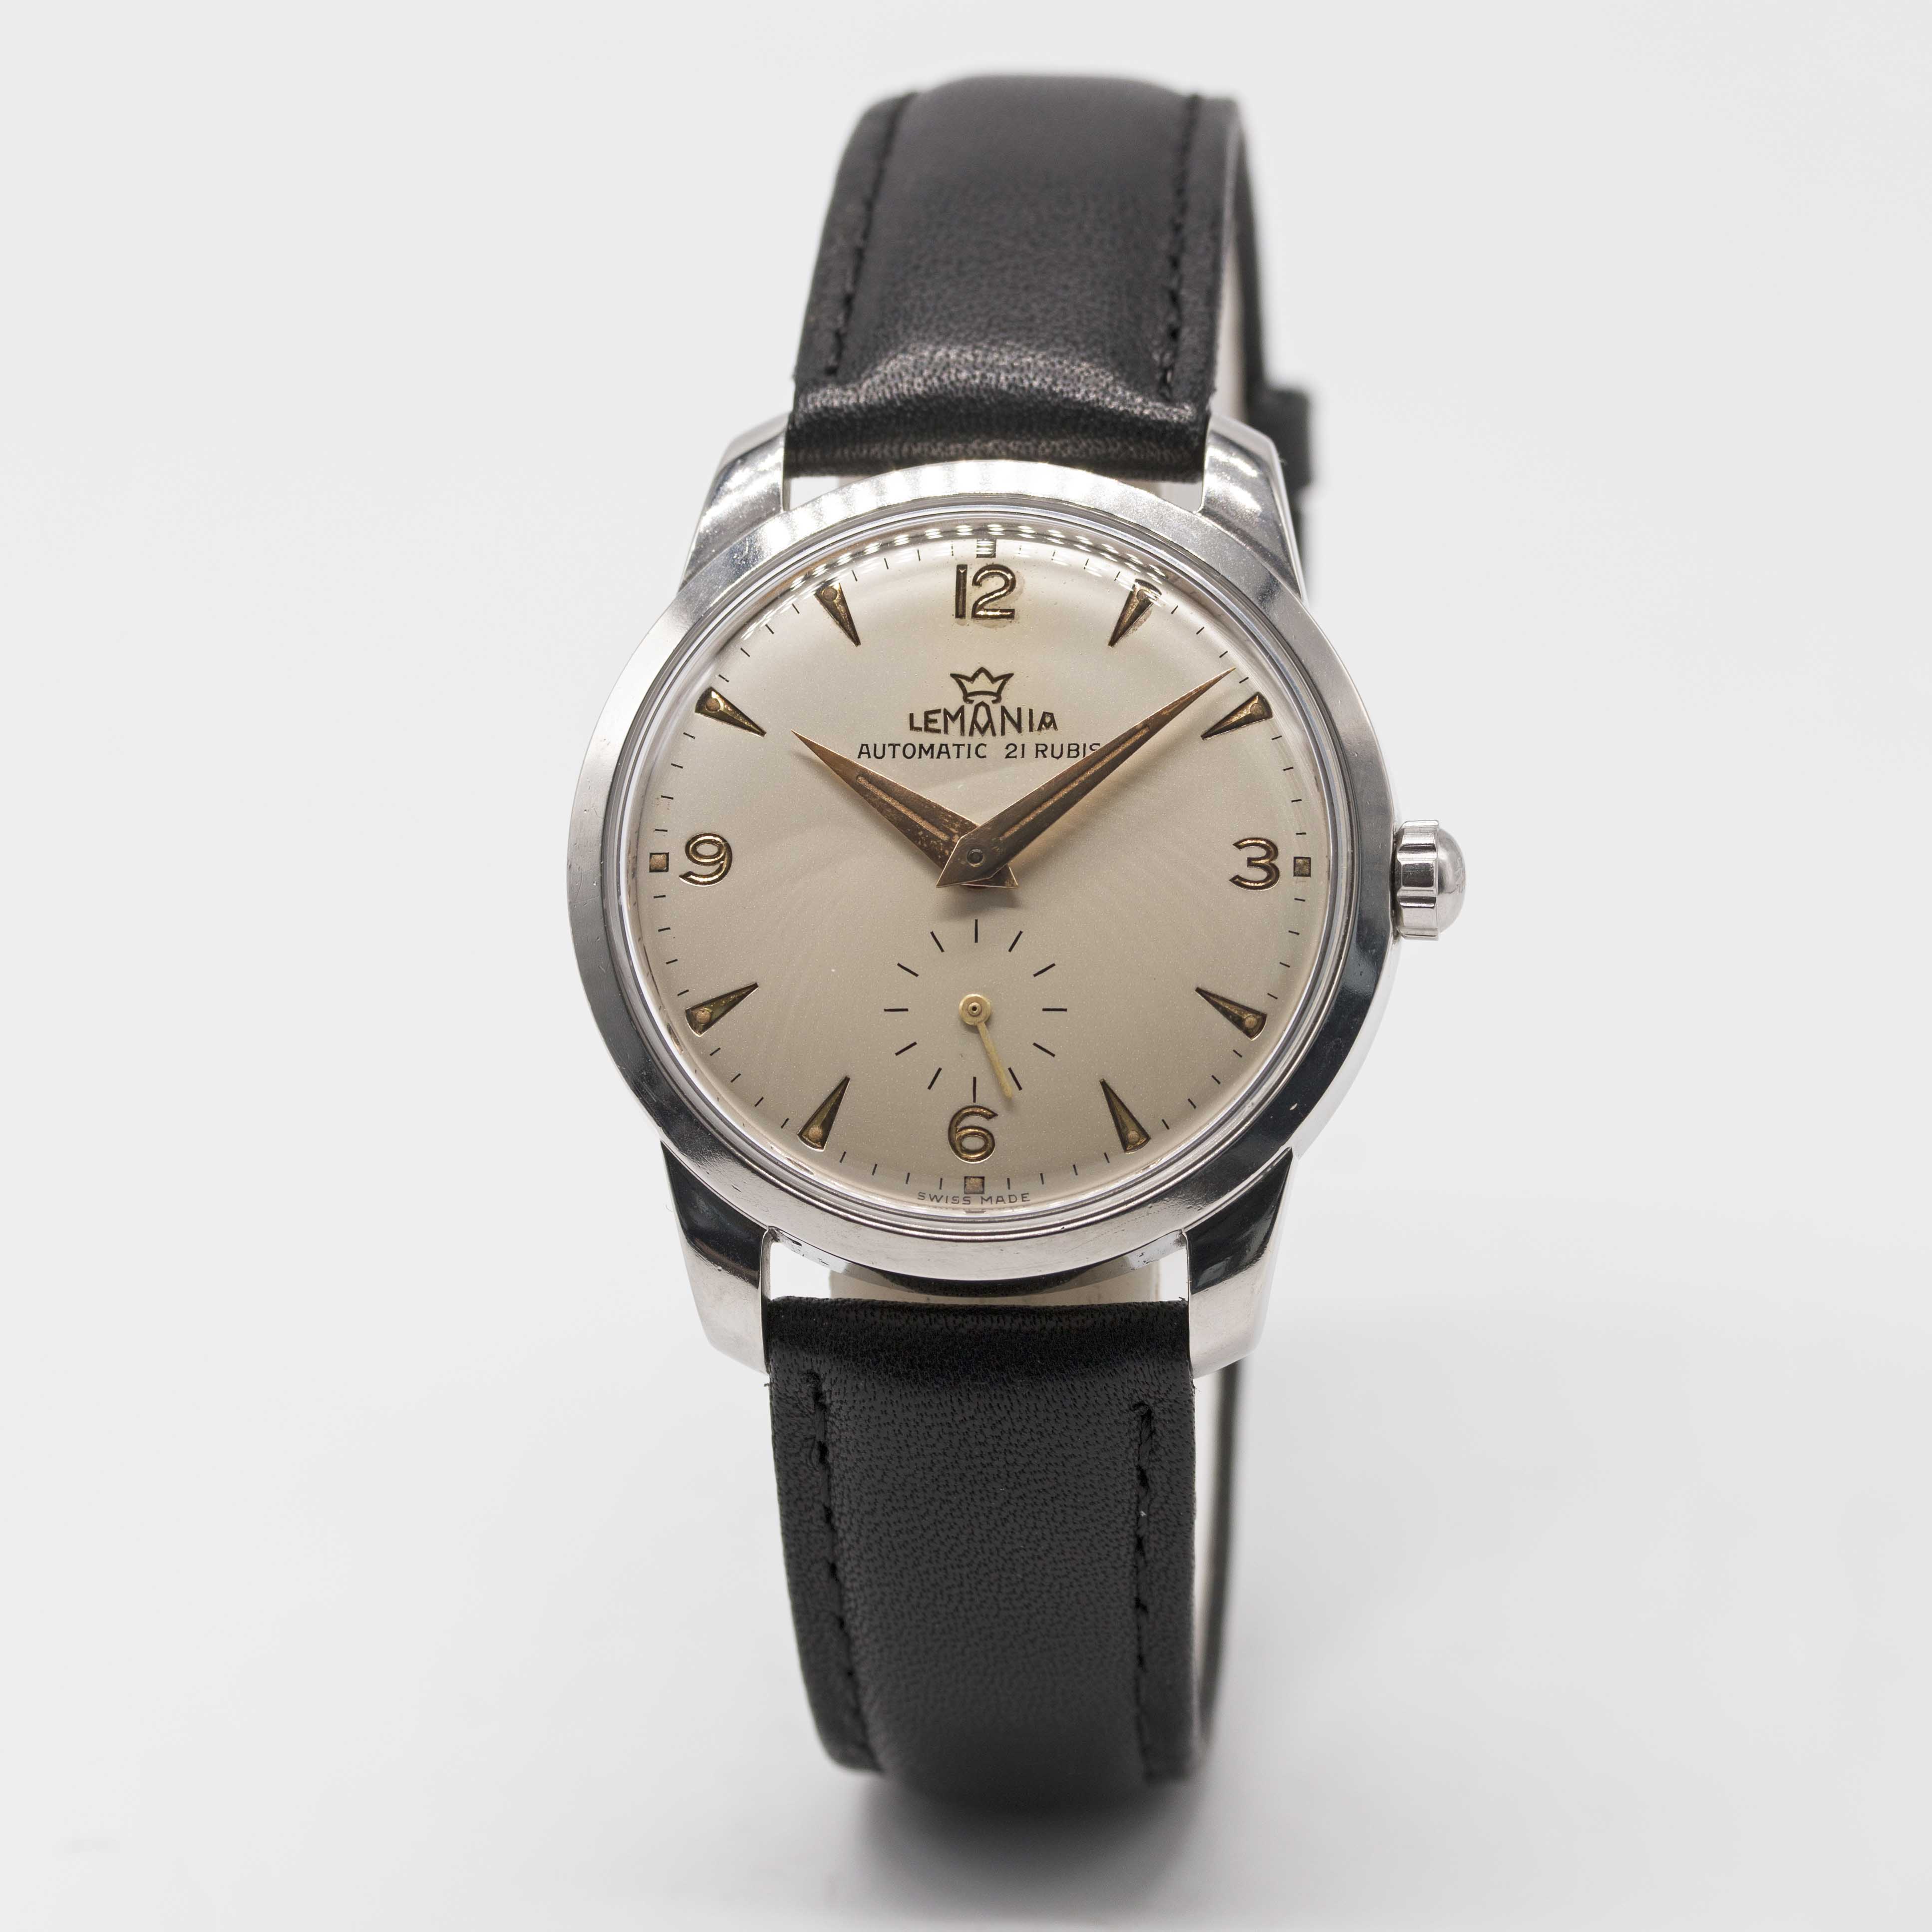 A GENTLEMAN'S STAINLESS STEEL LEMANIA AUTOMATIC WRIST WATCH CIRCA 1960s, REF. 288/3 SILVER DIAL WITH - Image 2 of 6